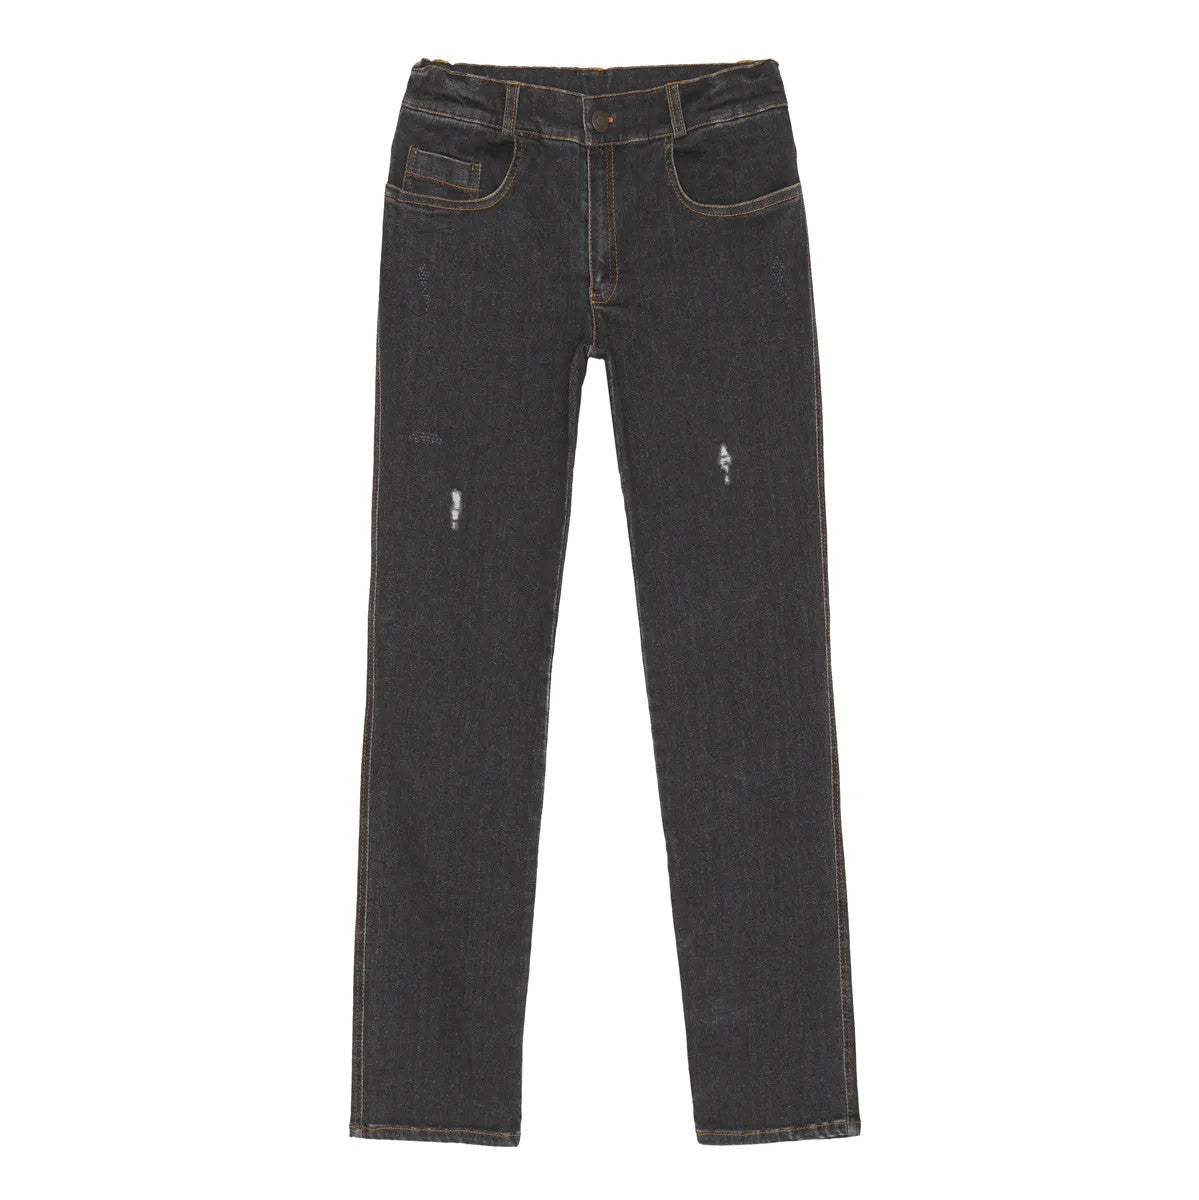 5-pocket soft black denim bootcut pants made of our organic fabric. Sustainable kids clothing for boys and girls made from organic cotton.